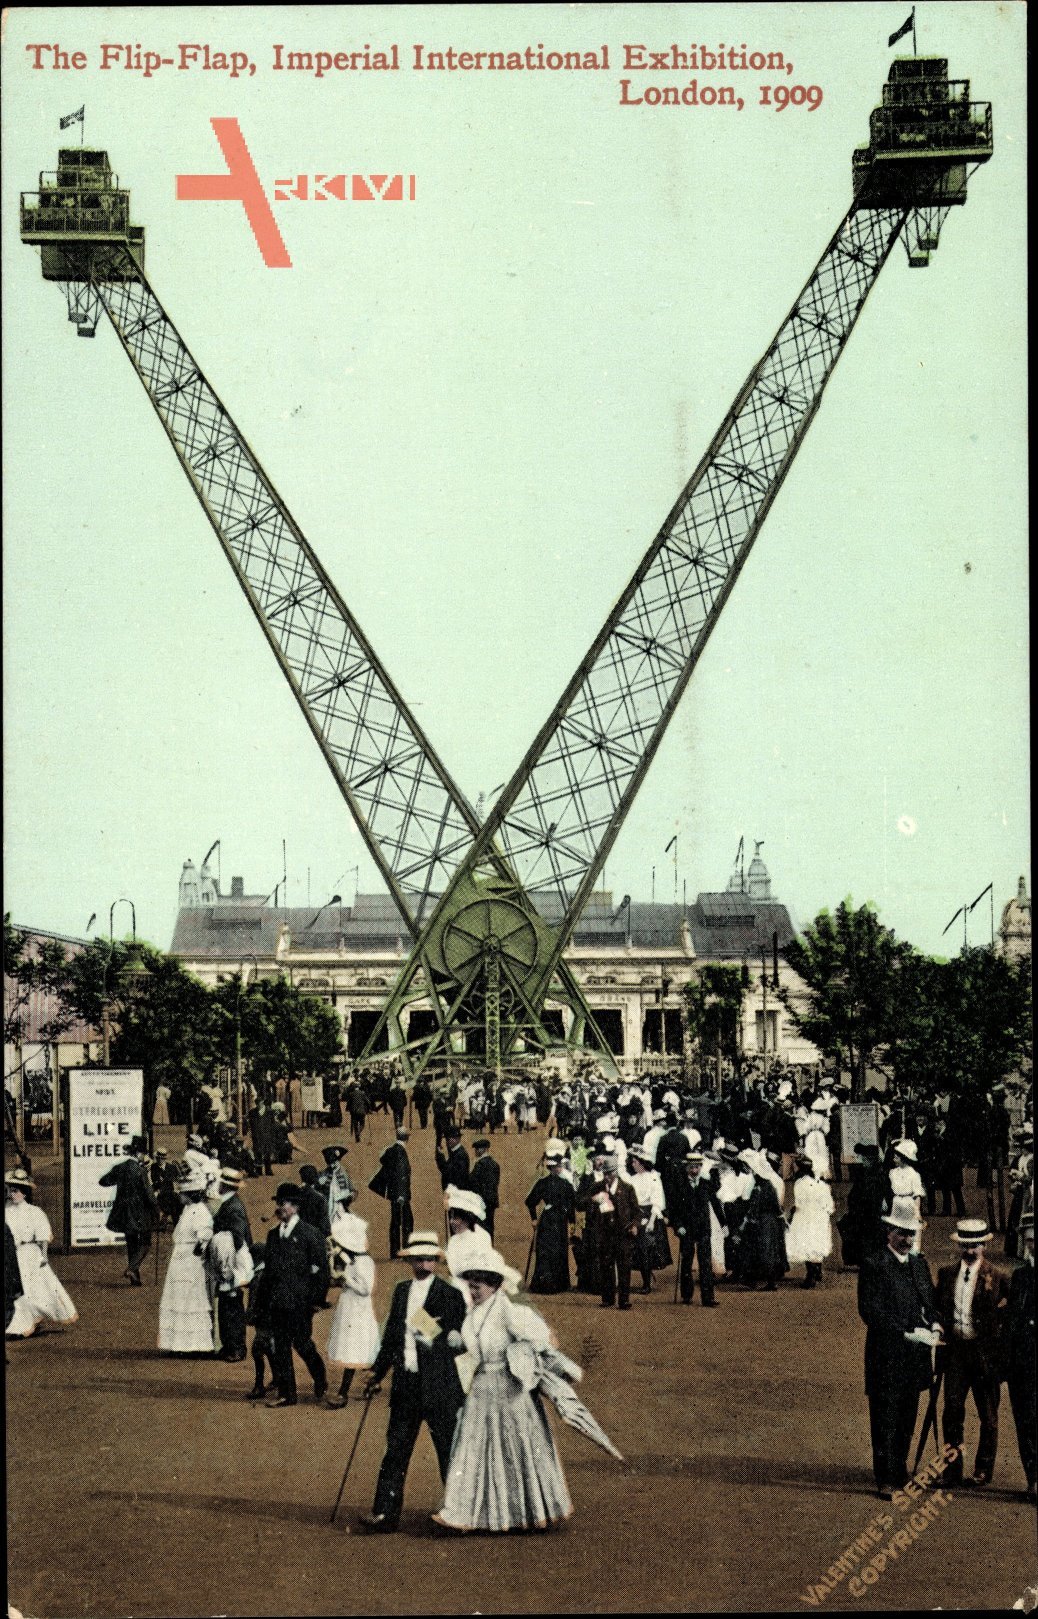 White City London, Imperial International Exhibition 1909, The Flip Flap